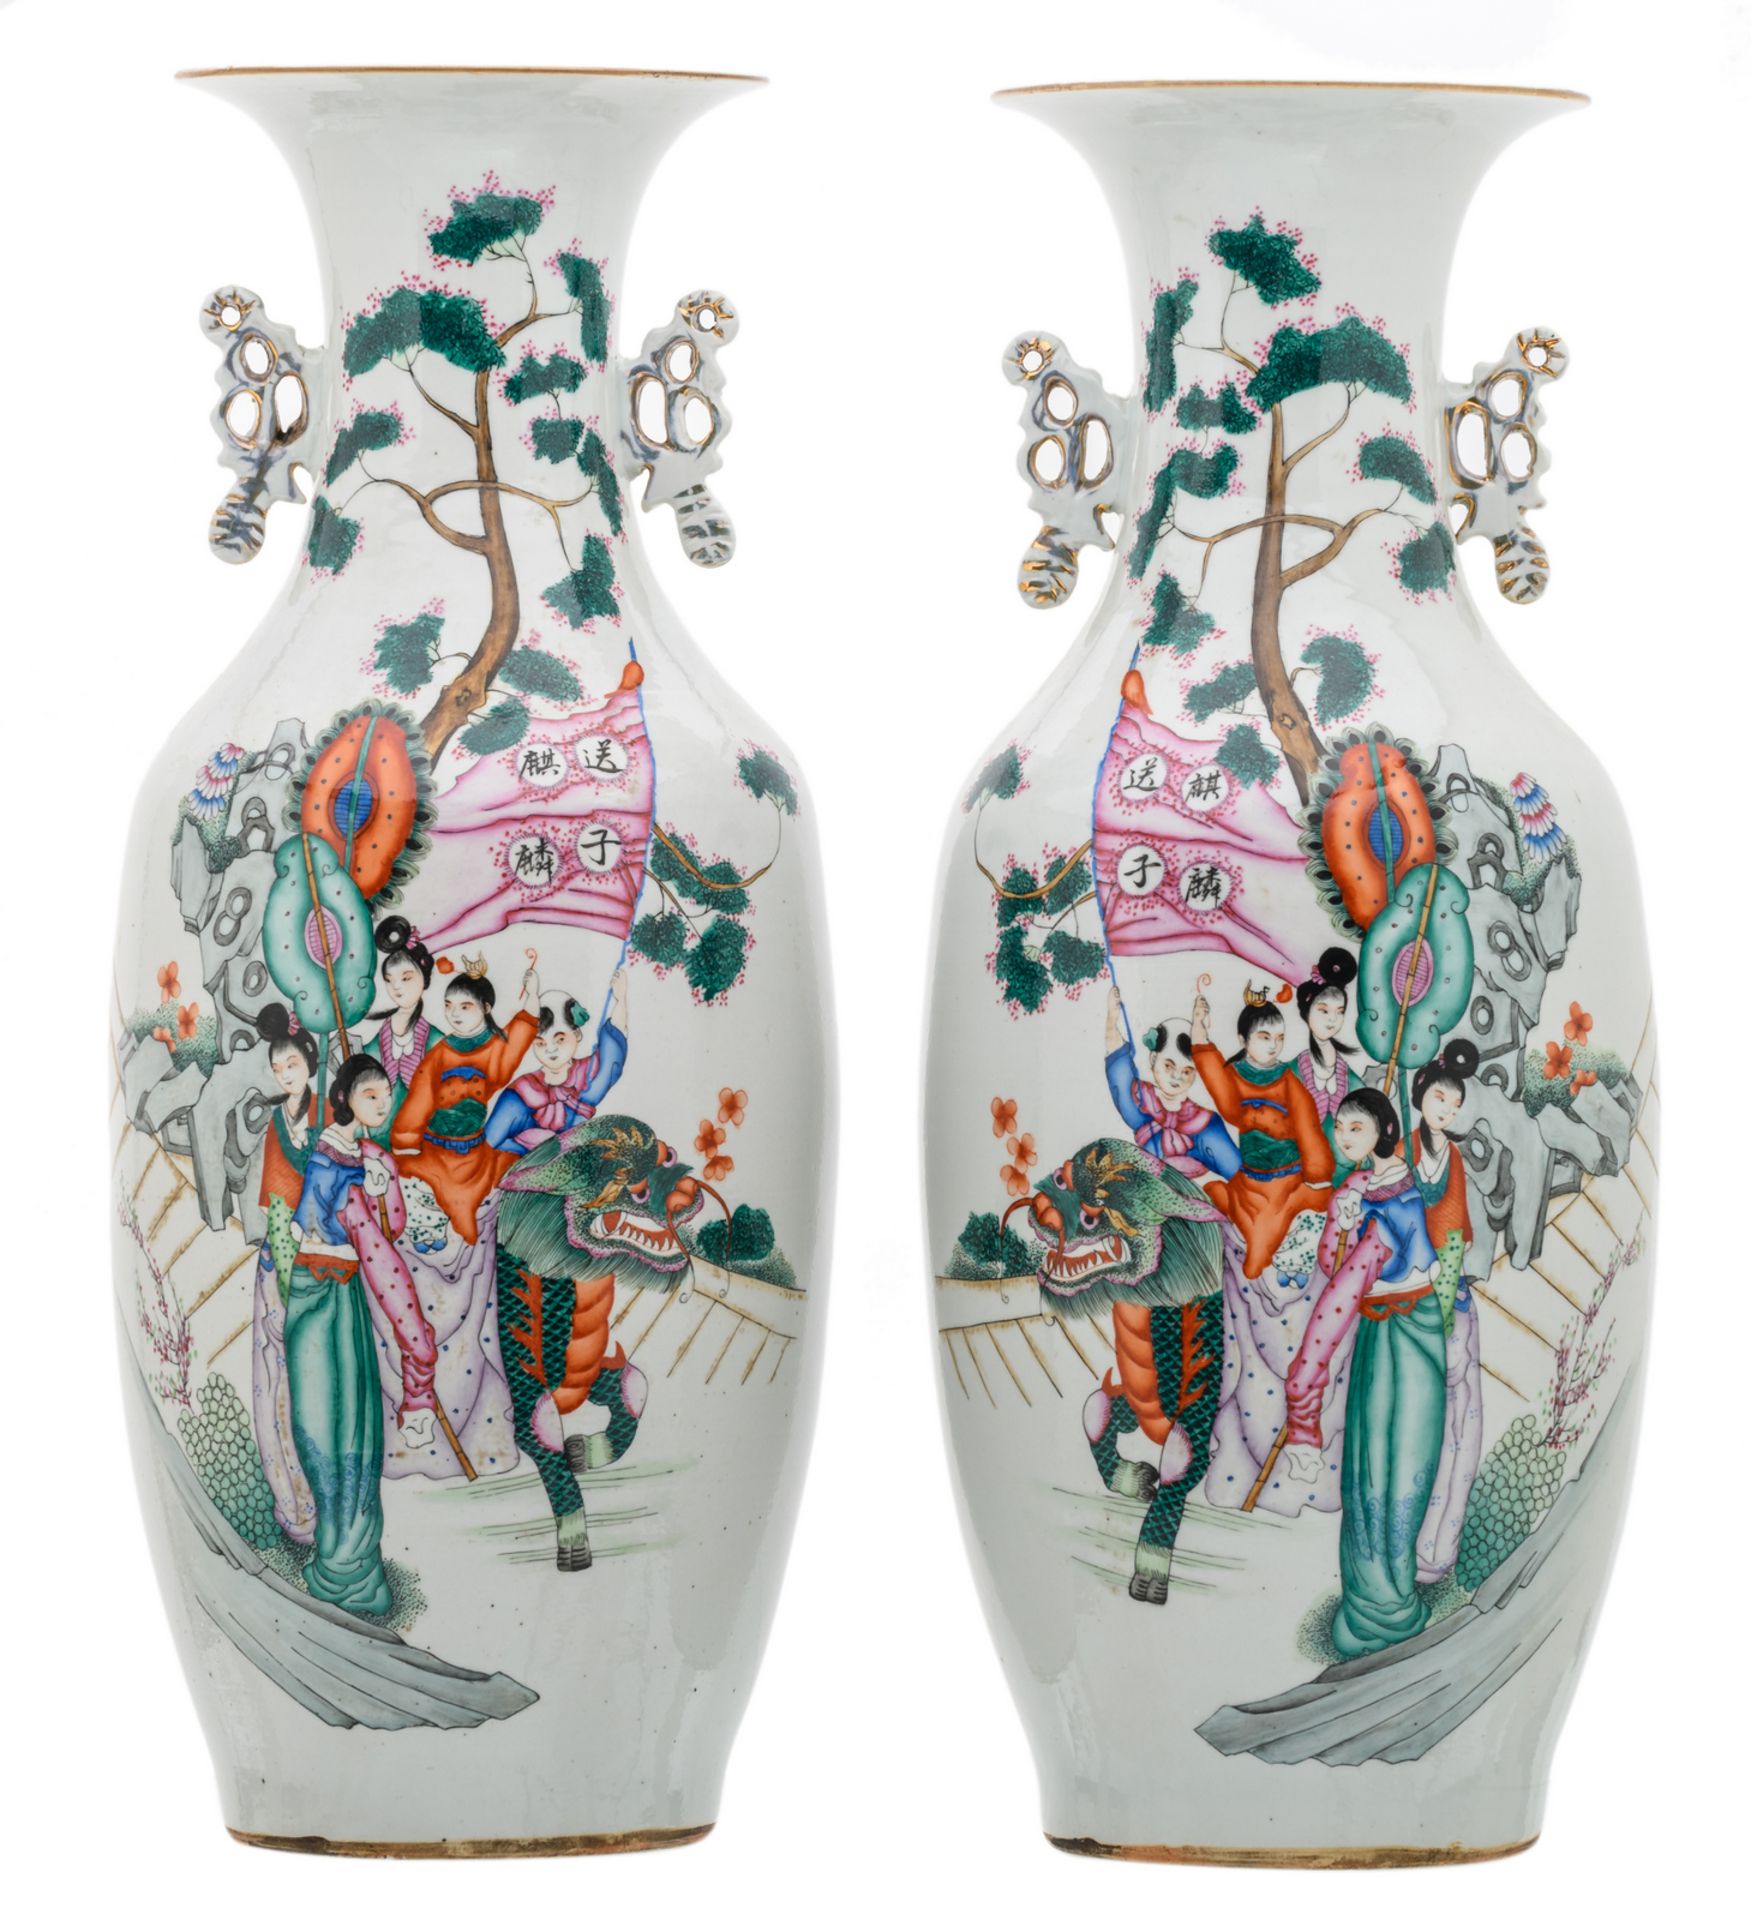 A pair of Chinese famille rose decorated vases with figures in a cortege and calligraphic texts, H